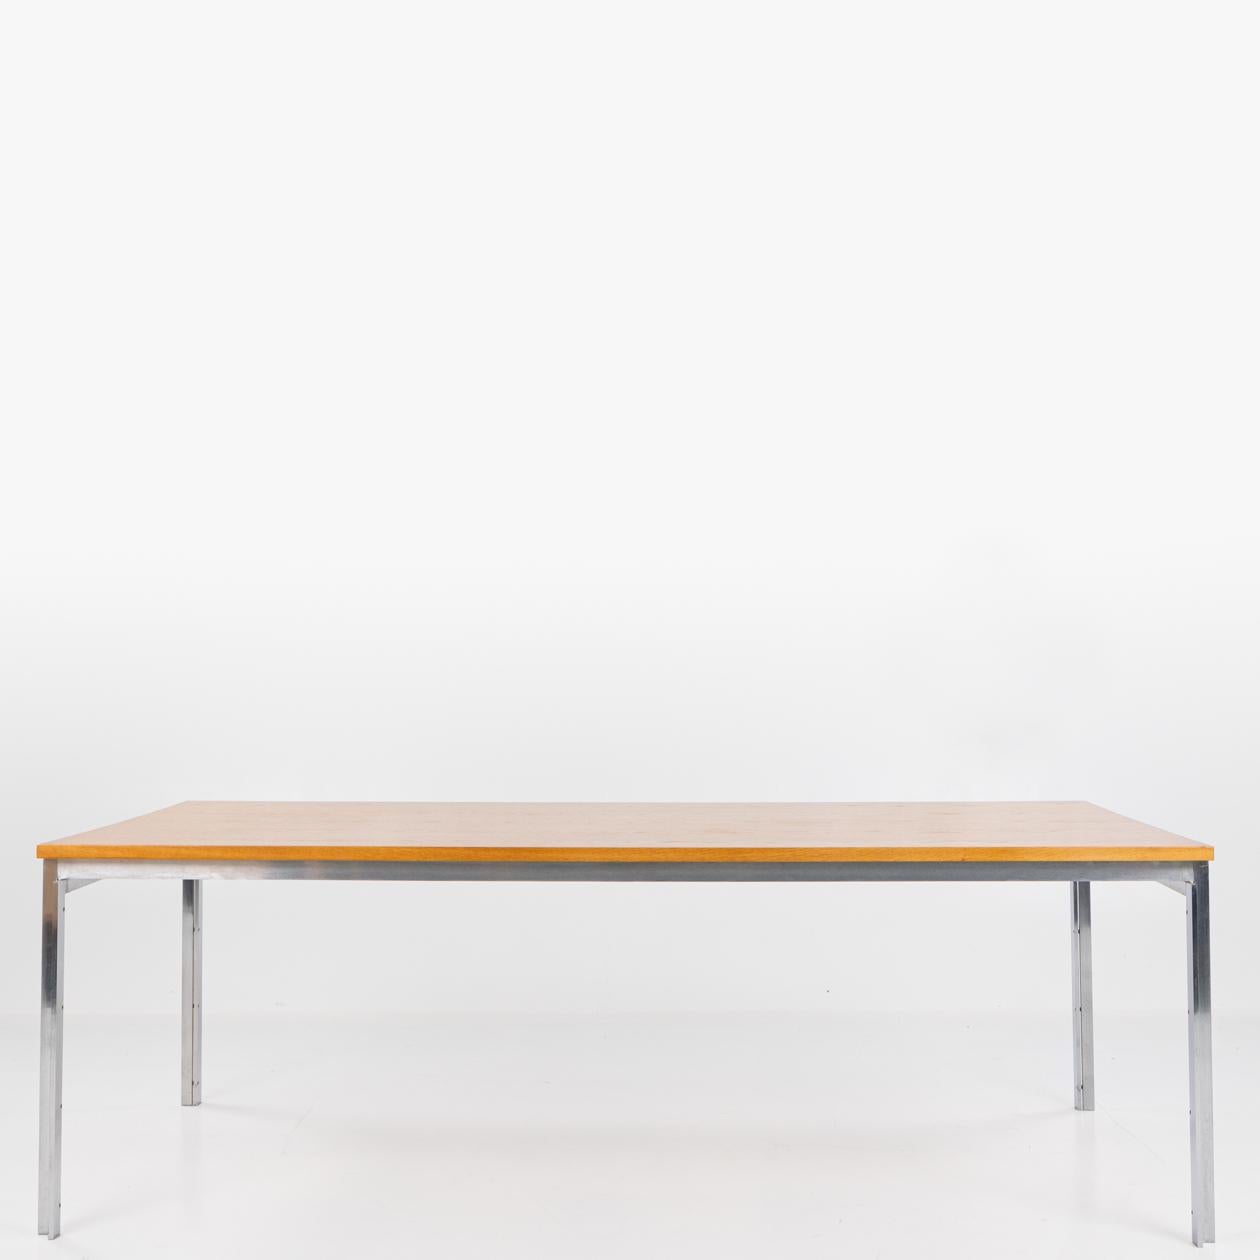 PK 55 - Desk/dining table with top in ash and steel frame. Marked from the manufacturer. Designed by Poul Kjærholm ,made by E. Kold Christensen.